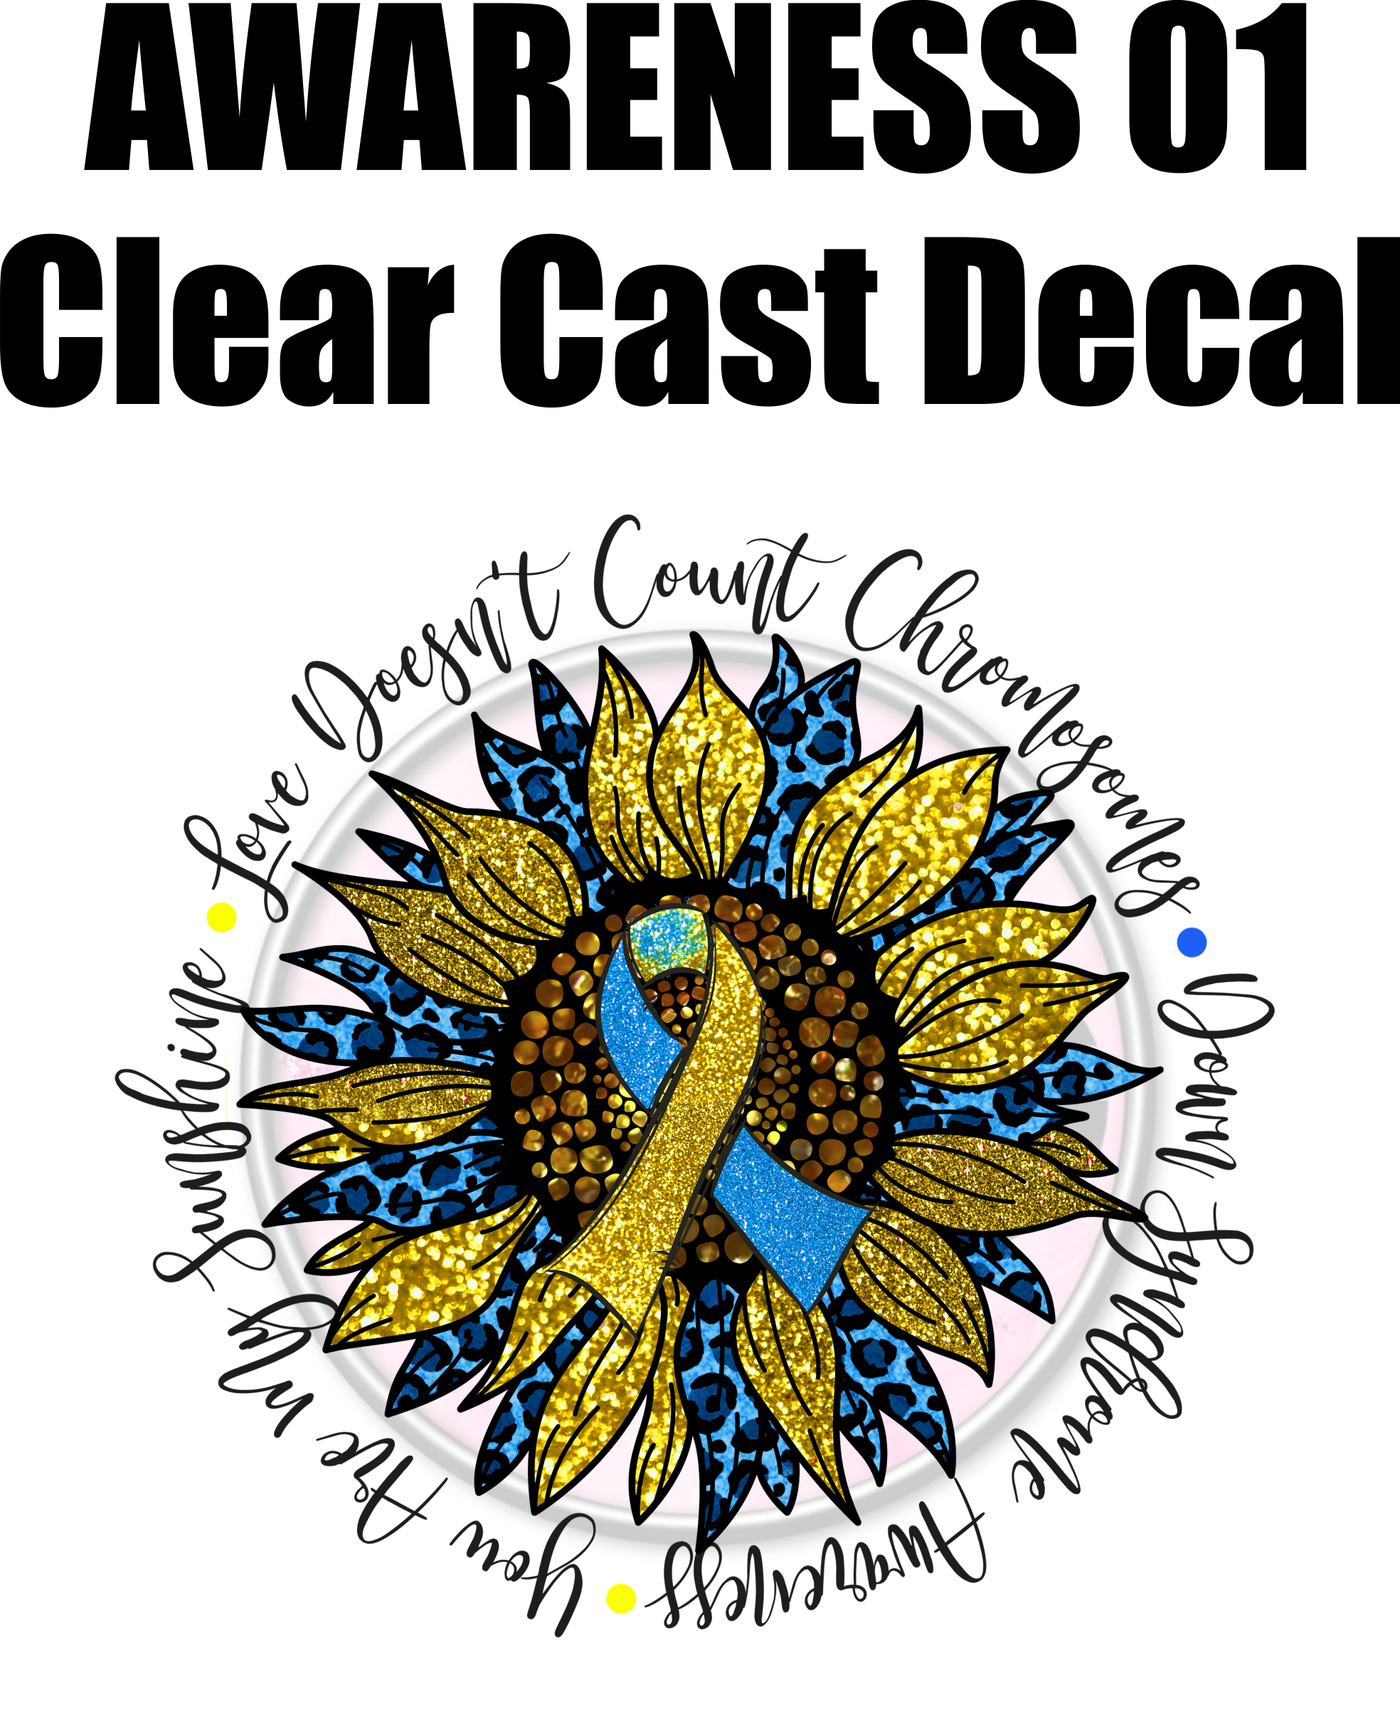 Awareness 1 - Clear Cast Decal